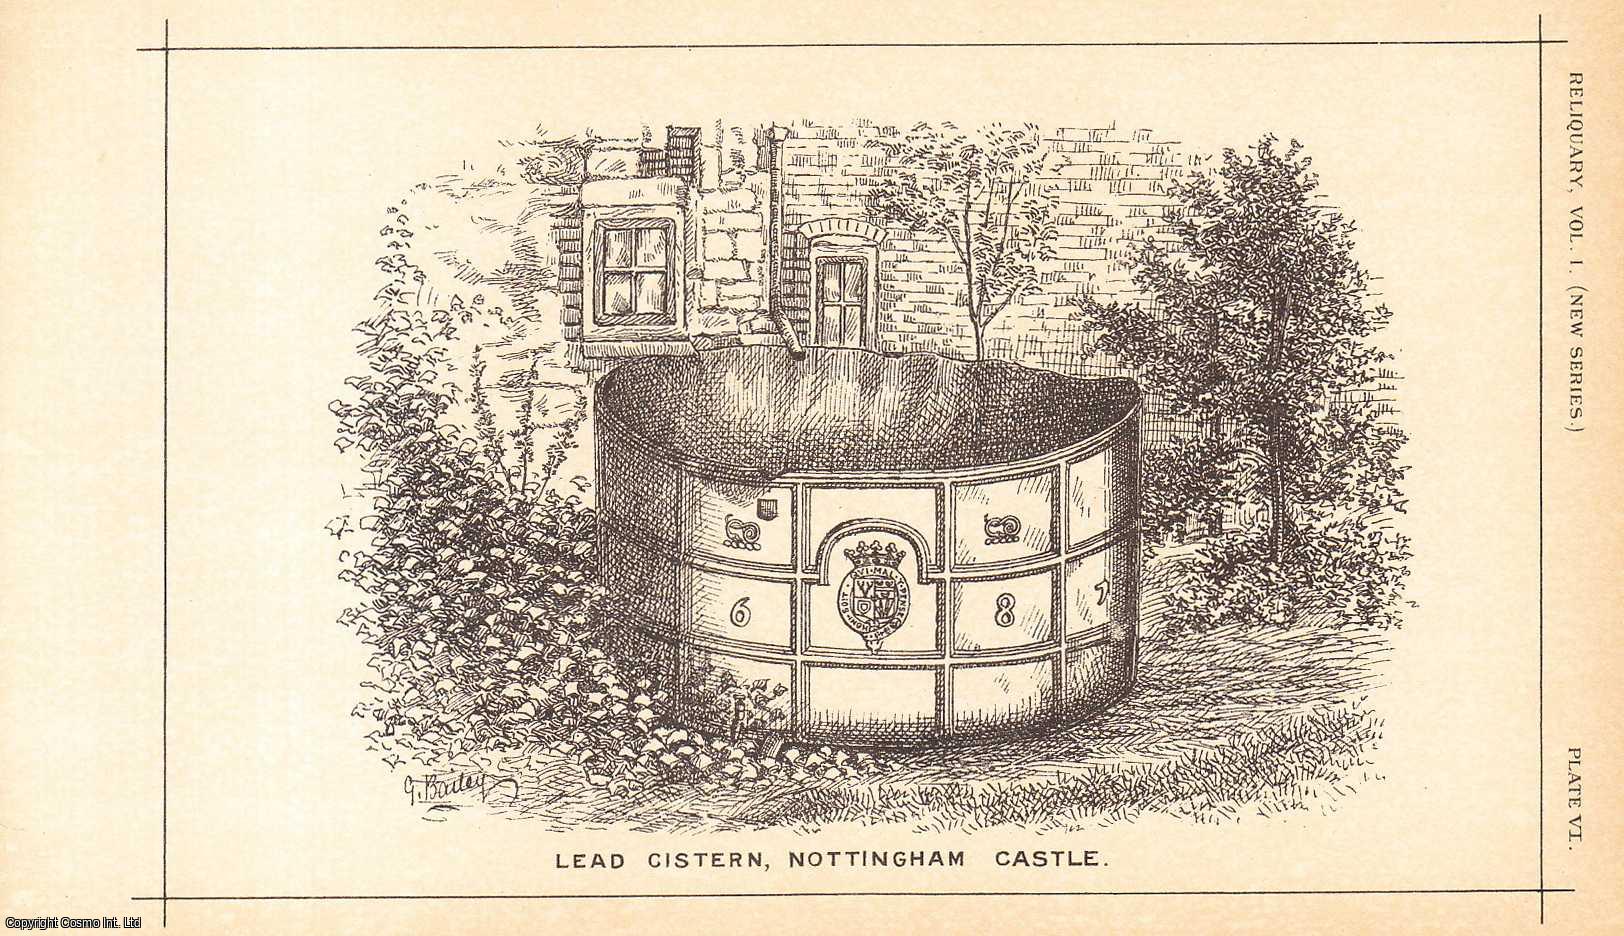 George Bailey - On a Lead Cistern at Nottingham Castle An original article from the Reliquary, Quarterly Journal & Review, 1888.